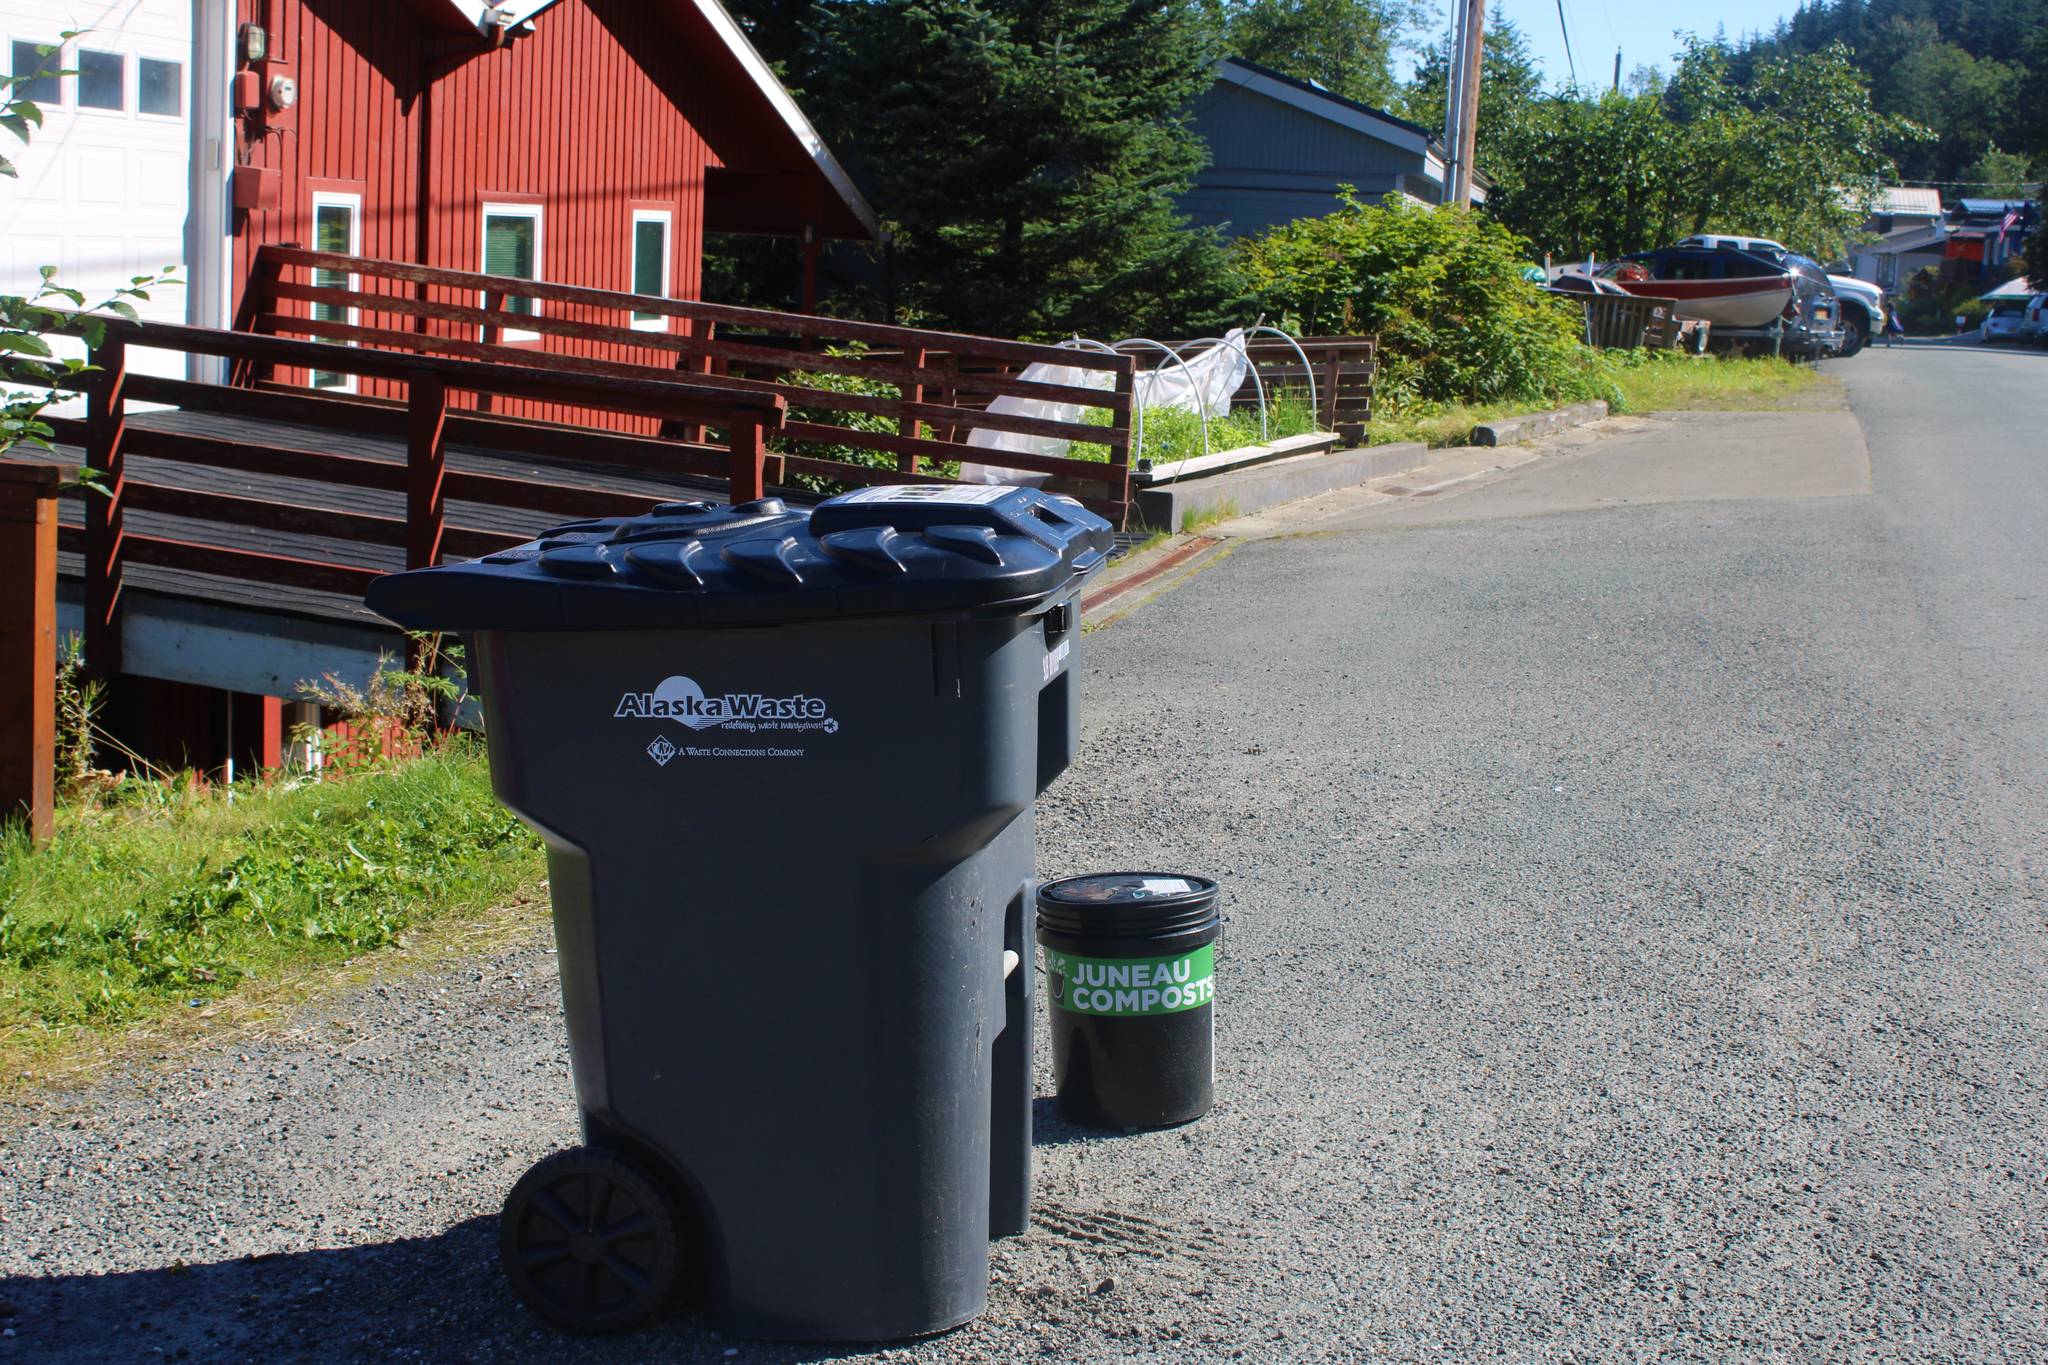 A garbage can sits next to a bin from Juneau Compost on Douglas on August 31. According to company officials, each day Juneau adds about 100 tons of garbage to the Capitol Disposal Landfill near Lemon Creek. At that rate, officials expect the landfill to be full in about 20 years. The city is exploring new ways to deal with Juneau's waste stream, including composting options. (Dana Zigmund/Juneau Empire.)